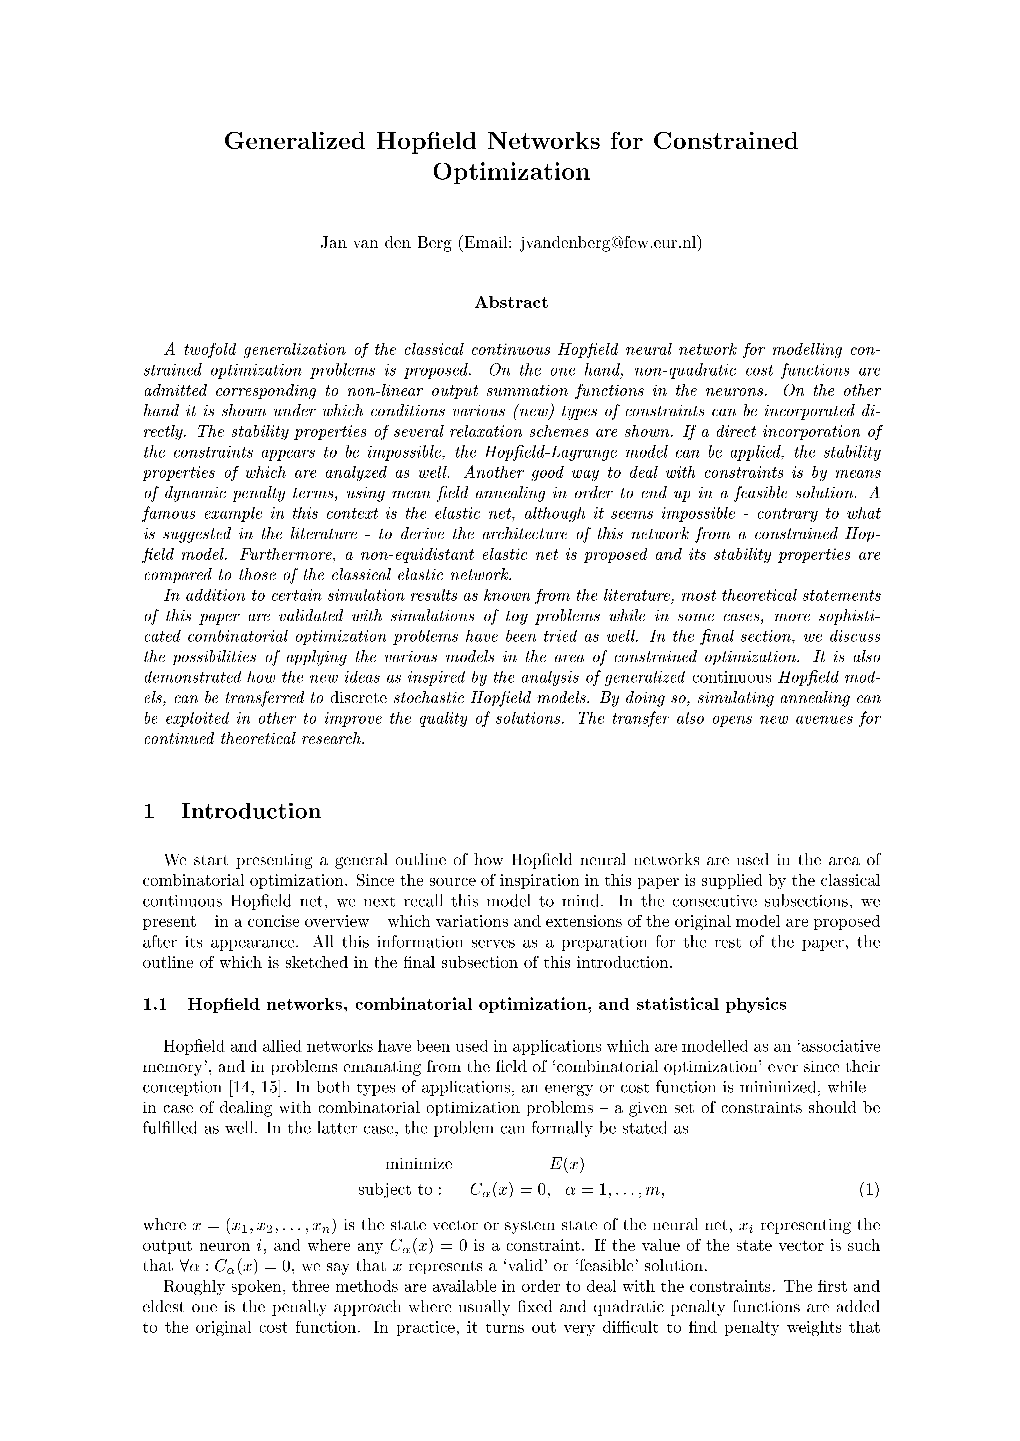 Generalized Hopfield Networks for Constrained Optimization